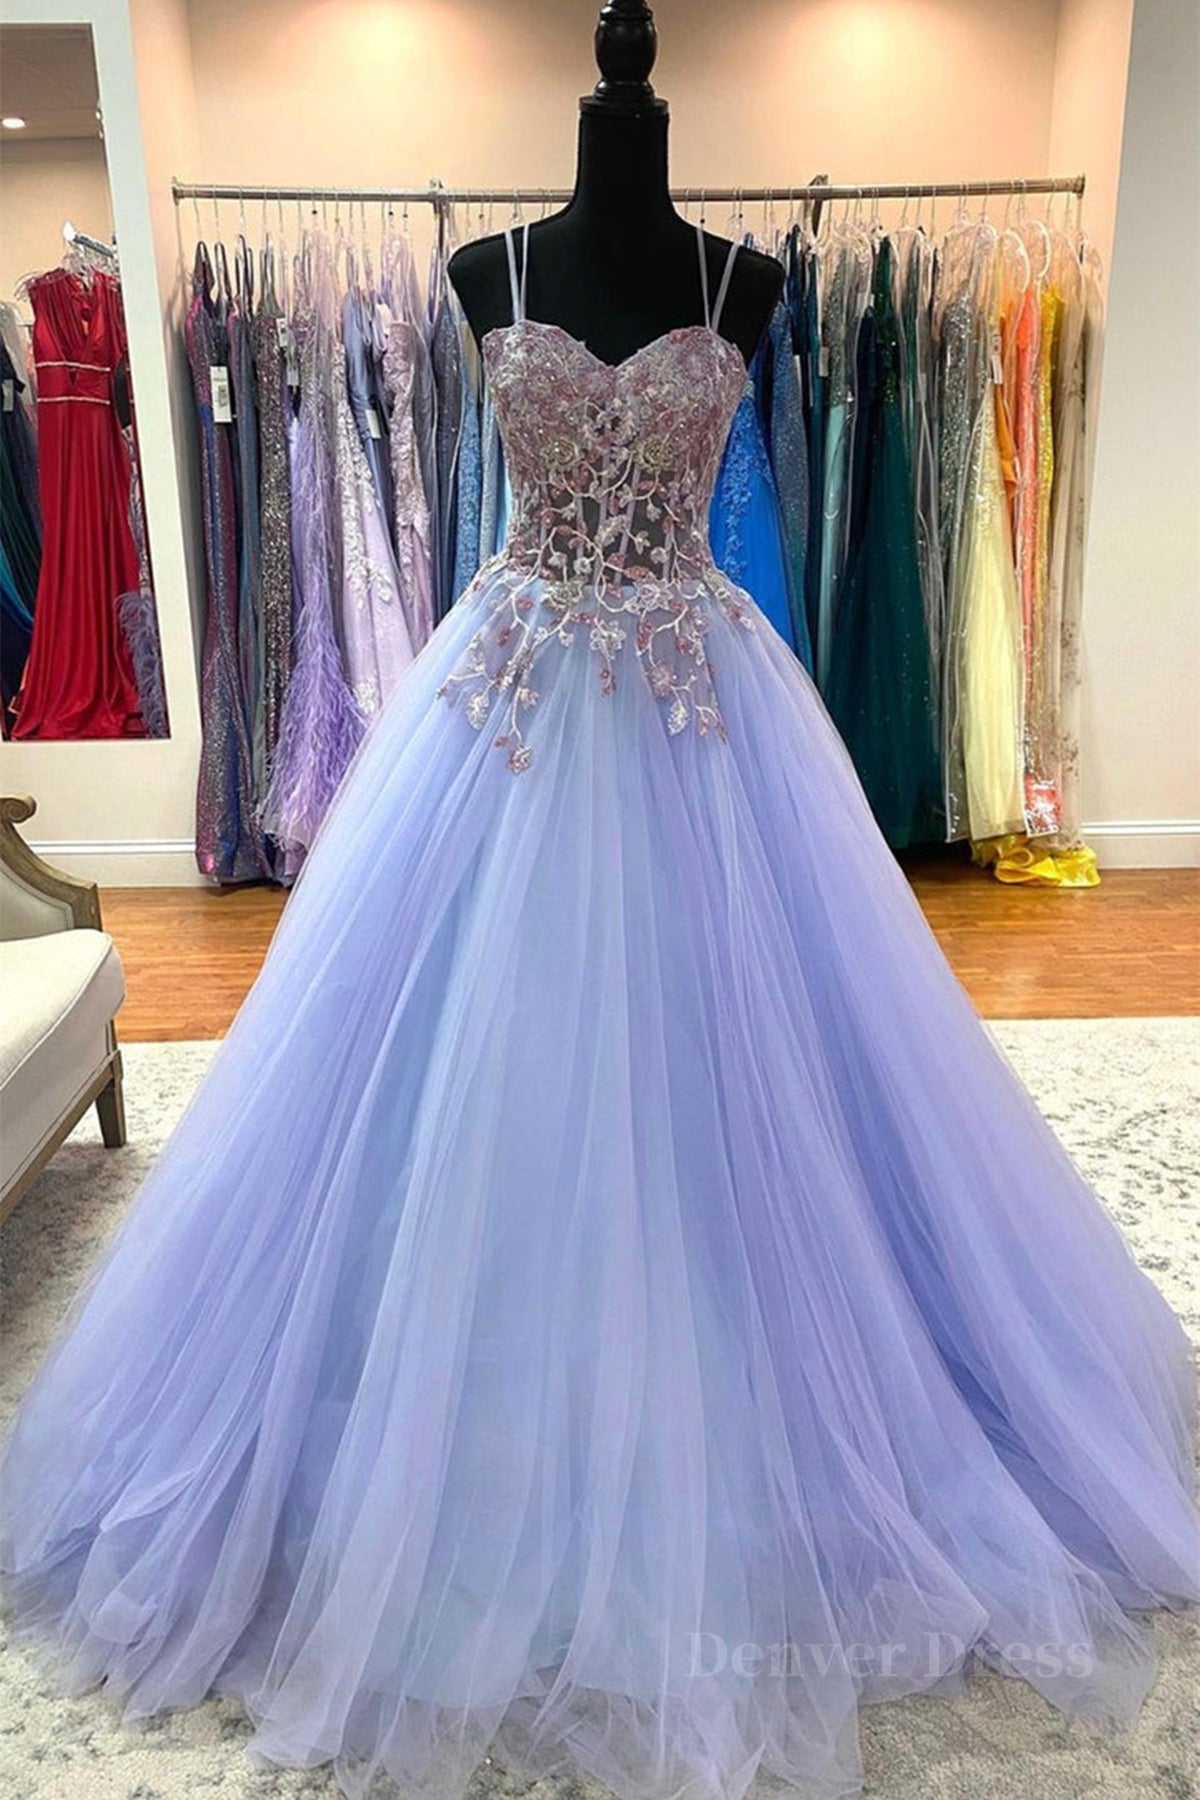 Sweetheart Neck Purple Tulle Long Prom Dress with Lace Appliques, Purple Lace Formal Graduation Evening Dress